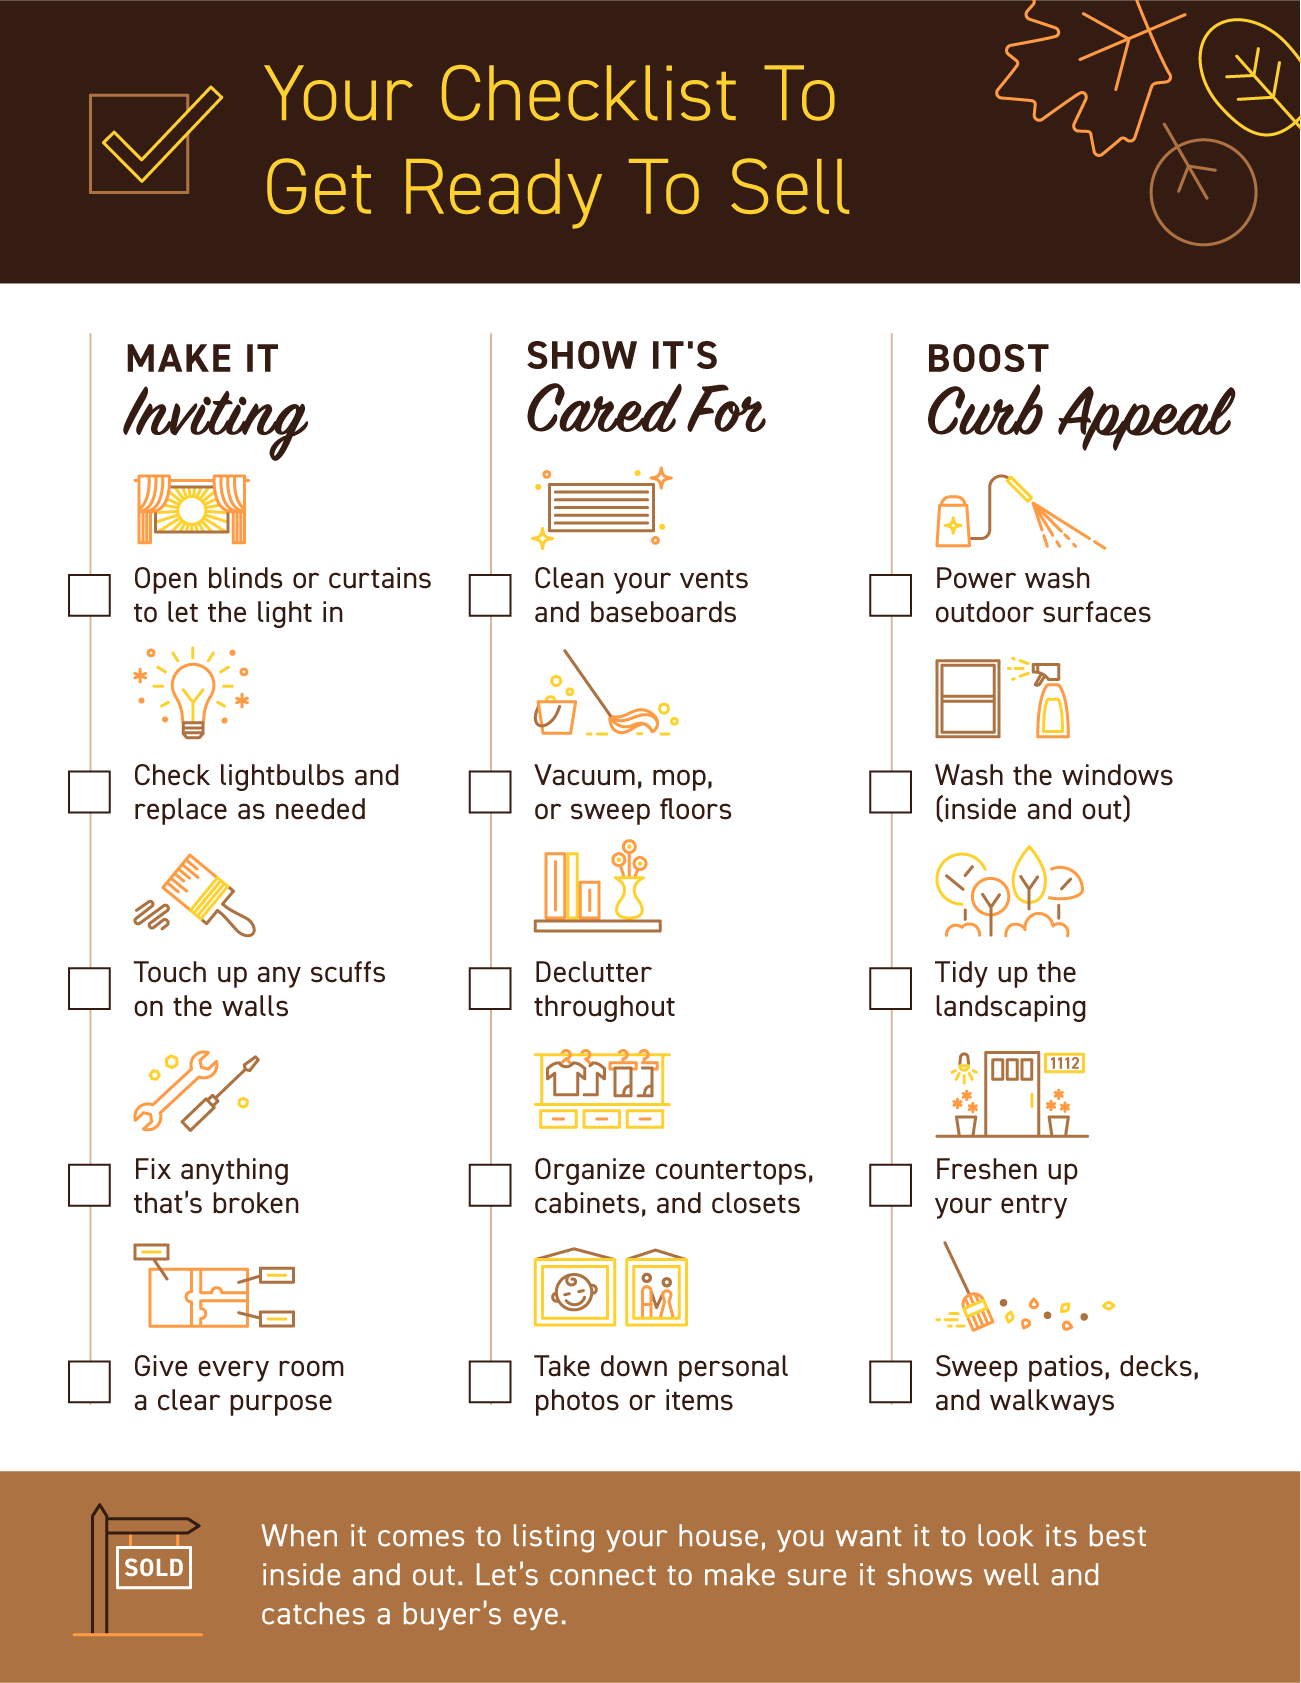 Your Checklist To Get Ready To Sell